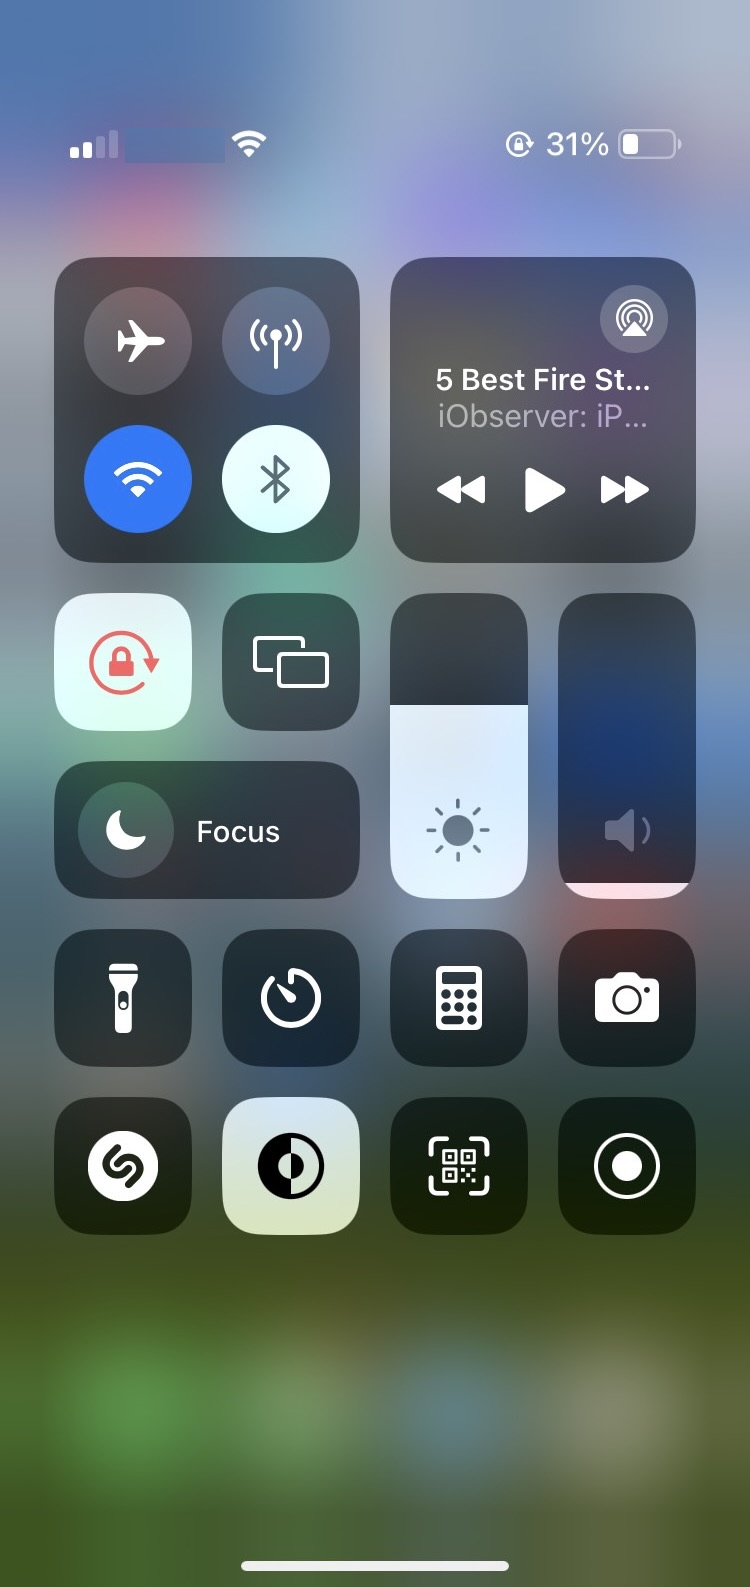 Open the Control Center on your iPhone